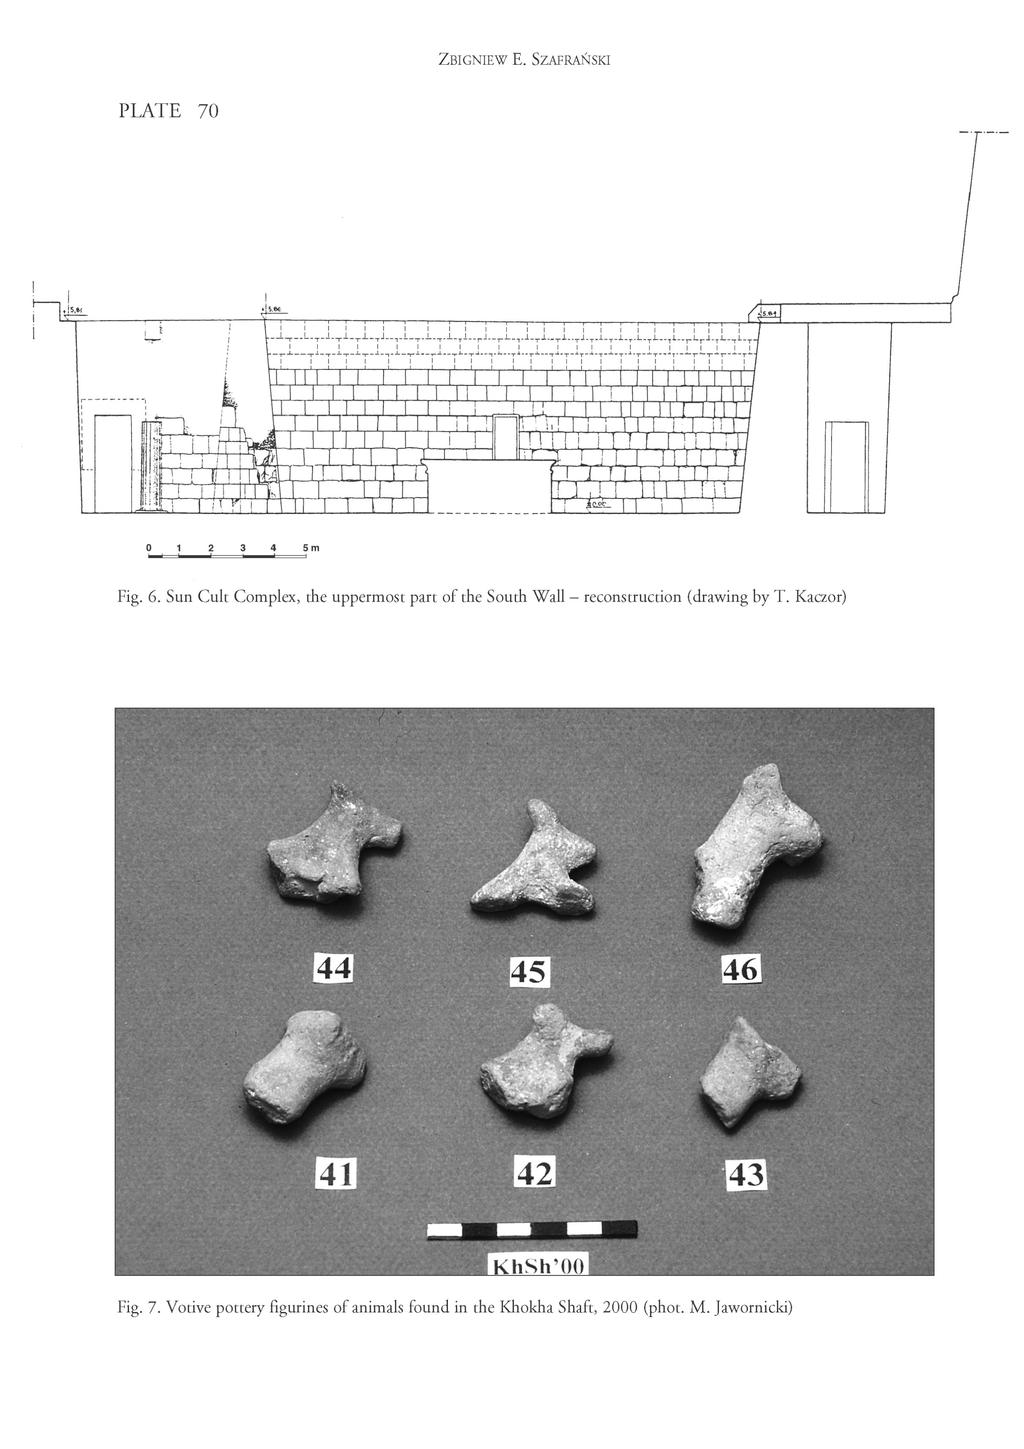 PLATE 70 Fig. 6. Sun Cult Complex, the uppermost part of the South Wall - reconstruction (drawing by T.